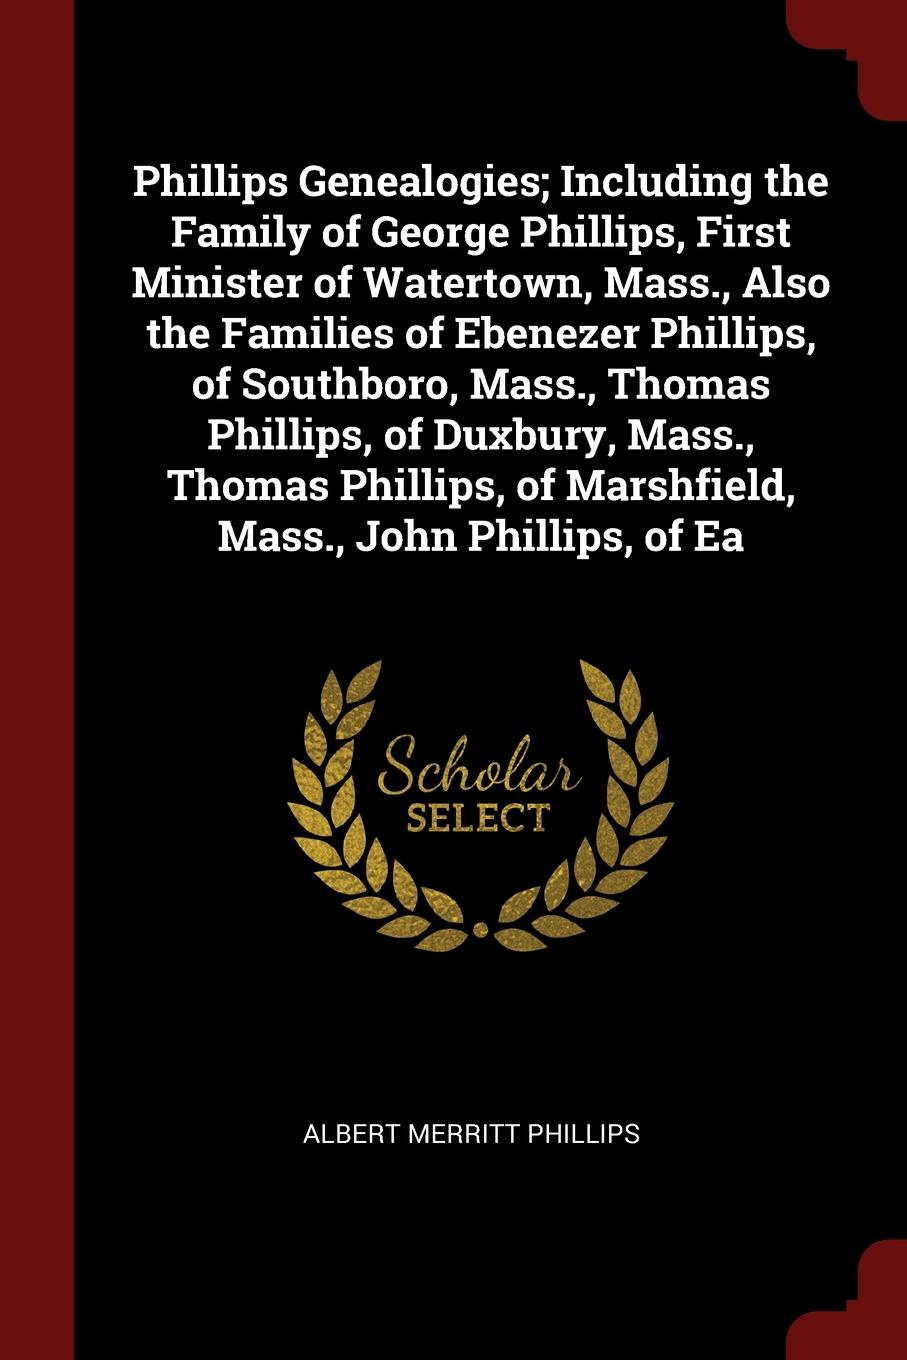 Phillips Genealogies; Including the Family of George Phillips, First Minister of Watertown, Mass., Also the Families of Ebenezer Phillips, of Southboro, Mass., Thomas Phillips, of Duxbury, Mass., Thomas Phillips, of Marshfield, Mass., John Phillip...